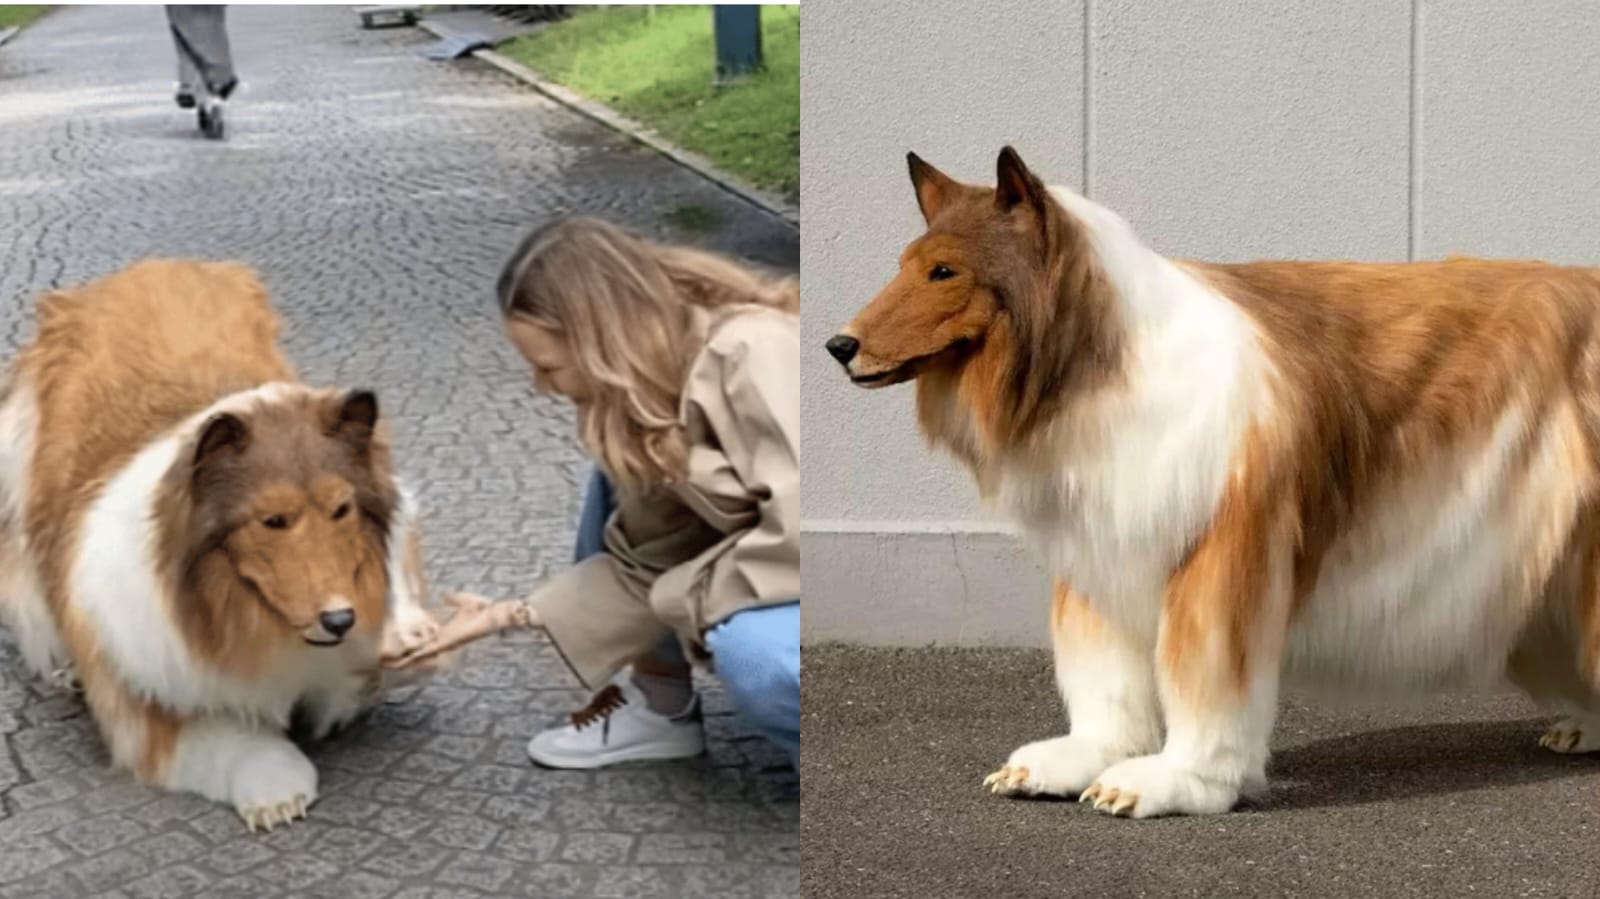 Man Who Transformed Himself Into a Dog Steps Out in Public For The First Time